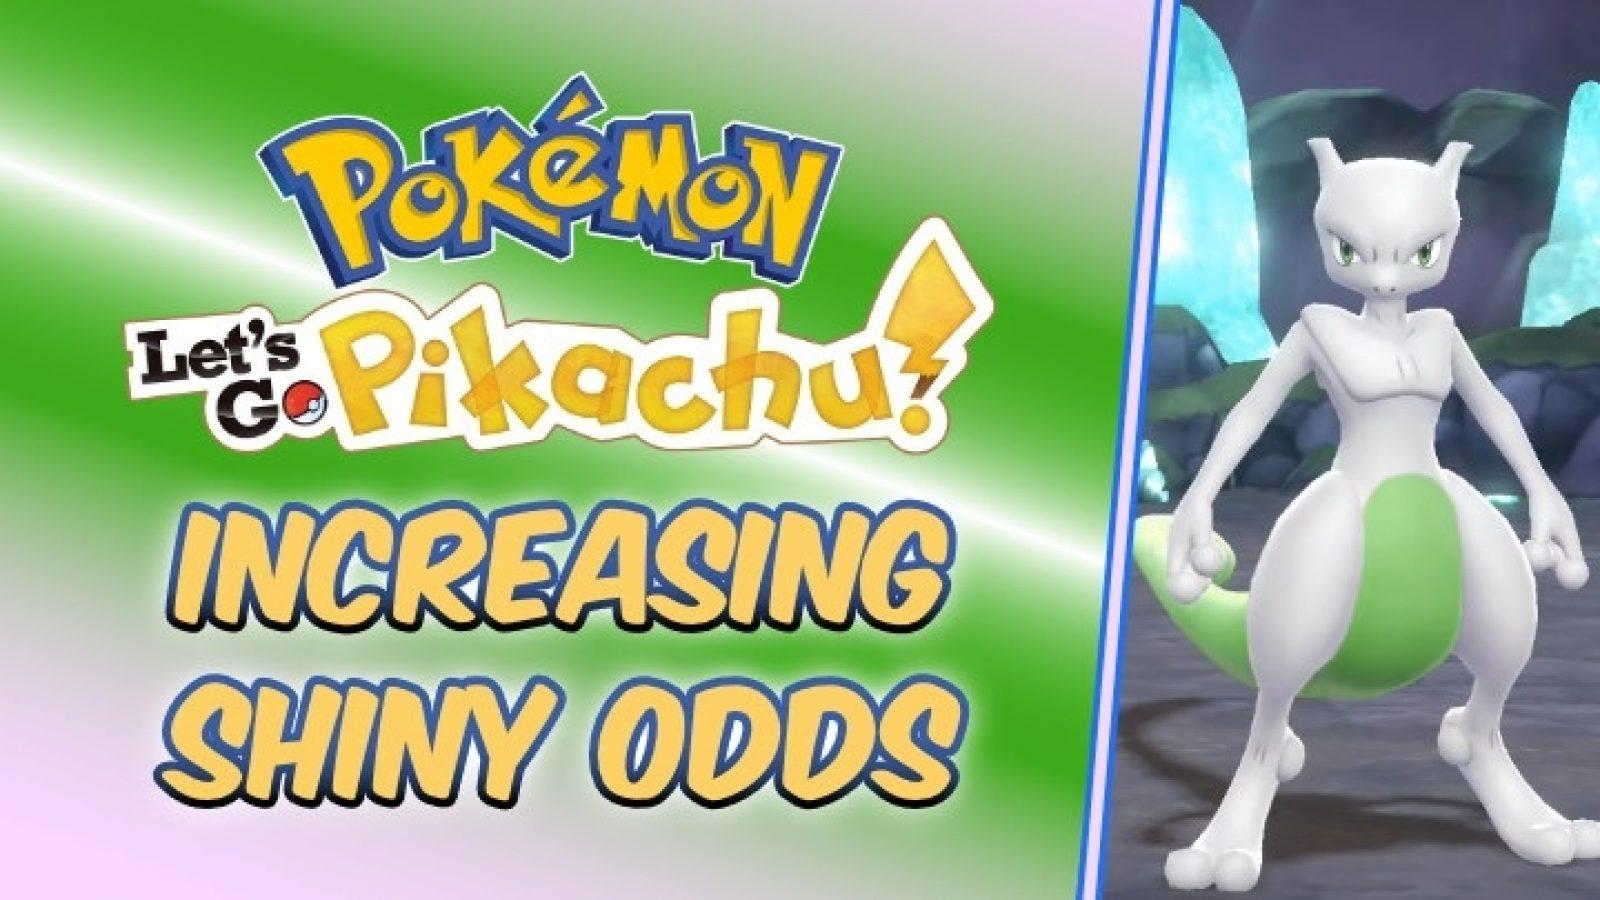 Pokemon: Last Chance To Get Free Shiny Pikachu/Eevee In Let's Go